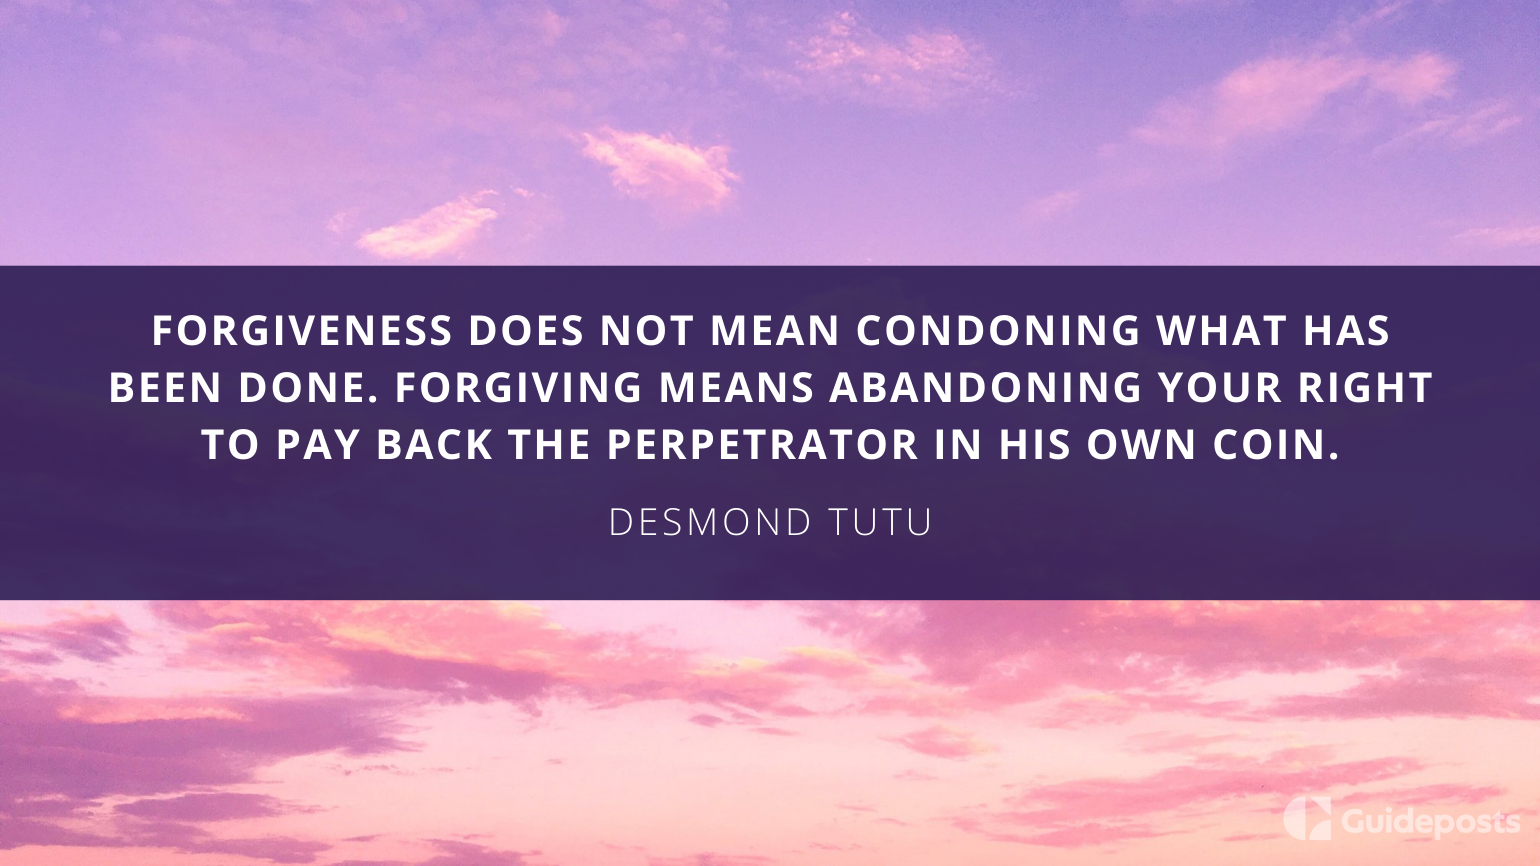 Forgiveness does not mean condoning what has been done. Forgiving means abandoning your right to pay back the perpetrator in his own coin.  —Desmond Tutu